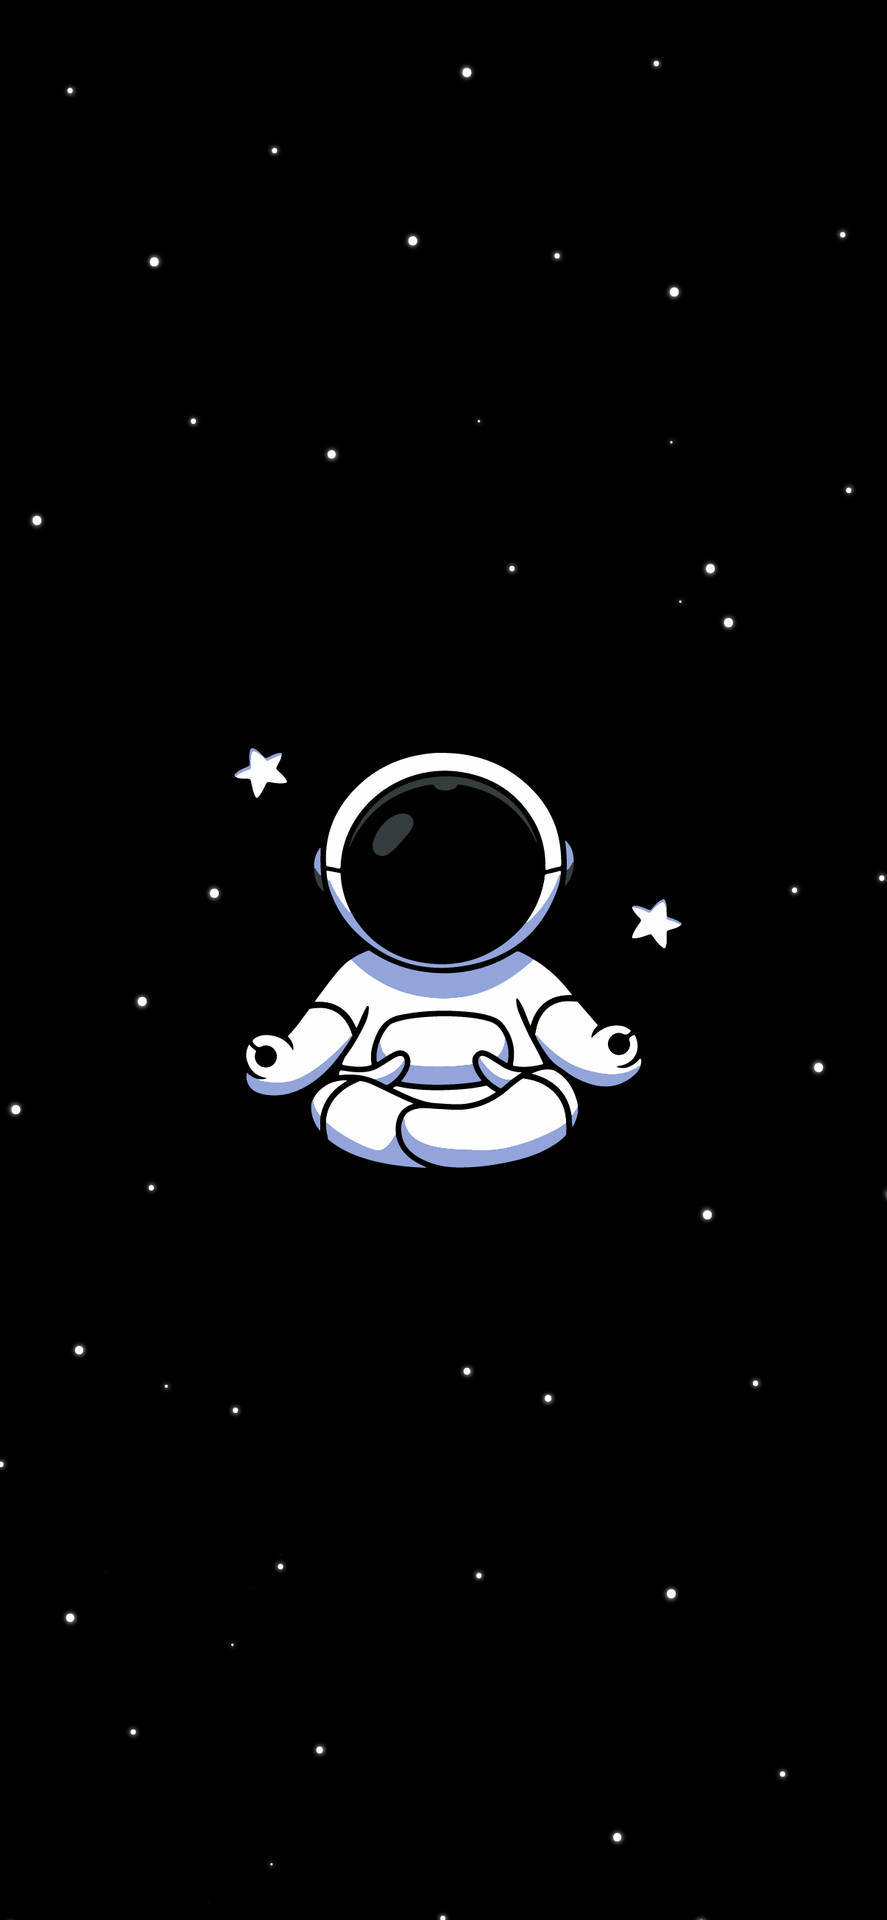 An Astronaut In Space With Stars In The Background Wallpaper